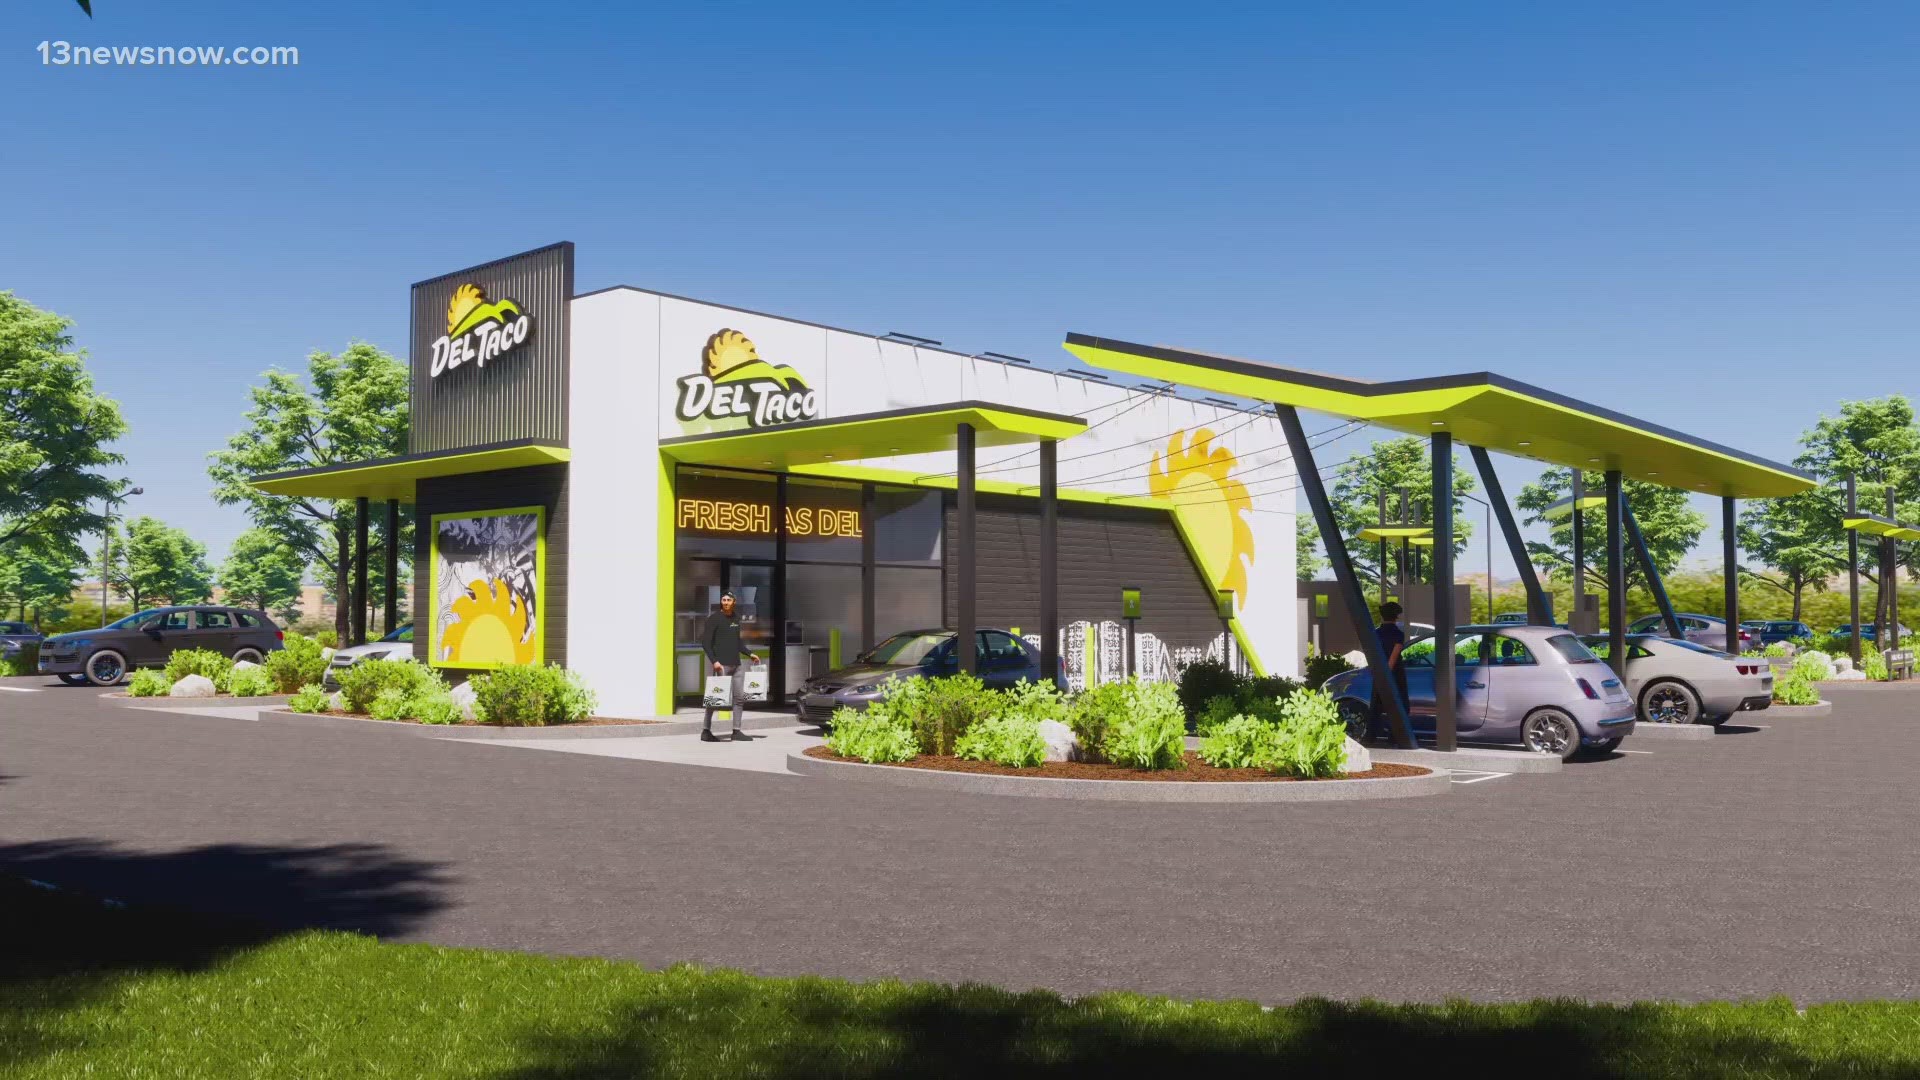 Chesapeake will soon be home to Virginia's first Del Taco. The California-based Mexican fast food chain location will open in June.